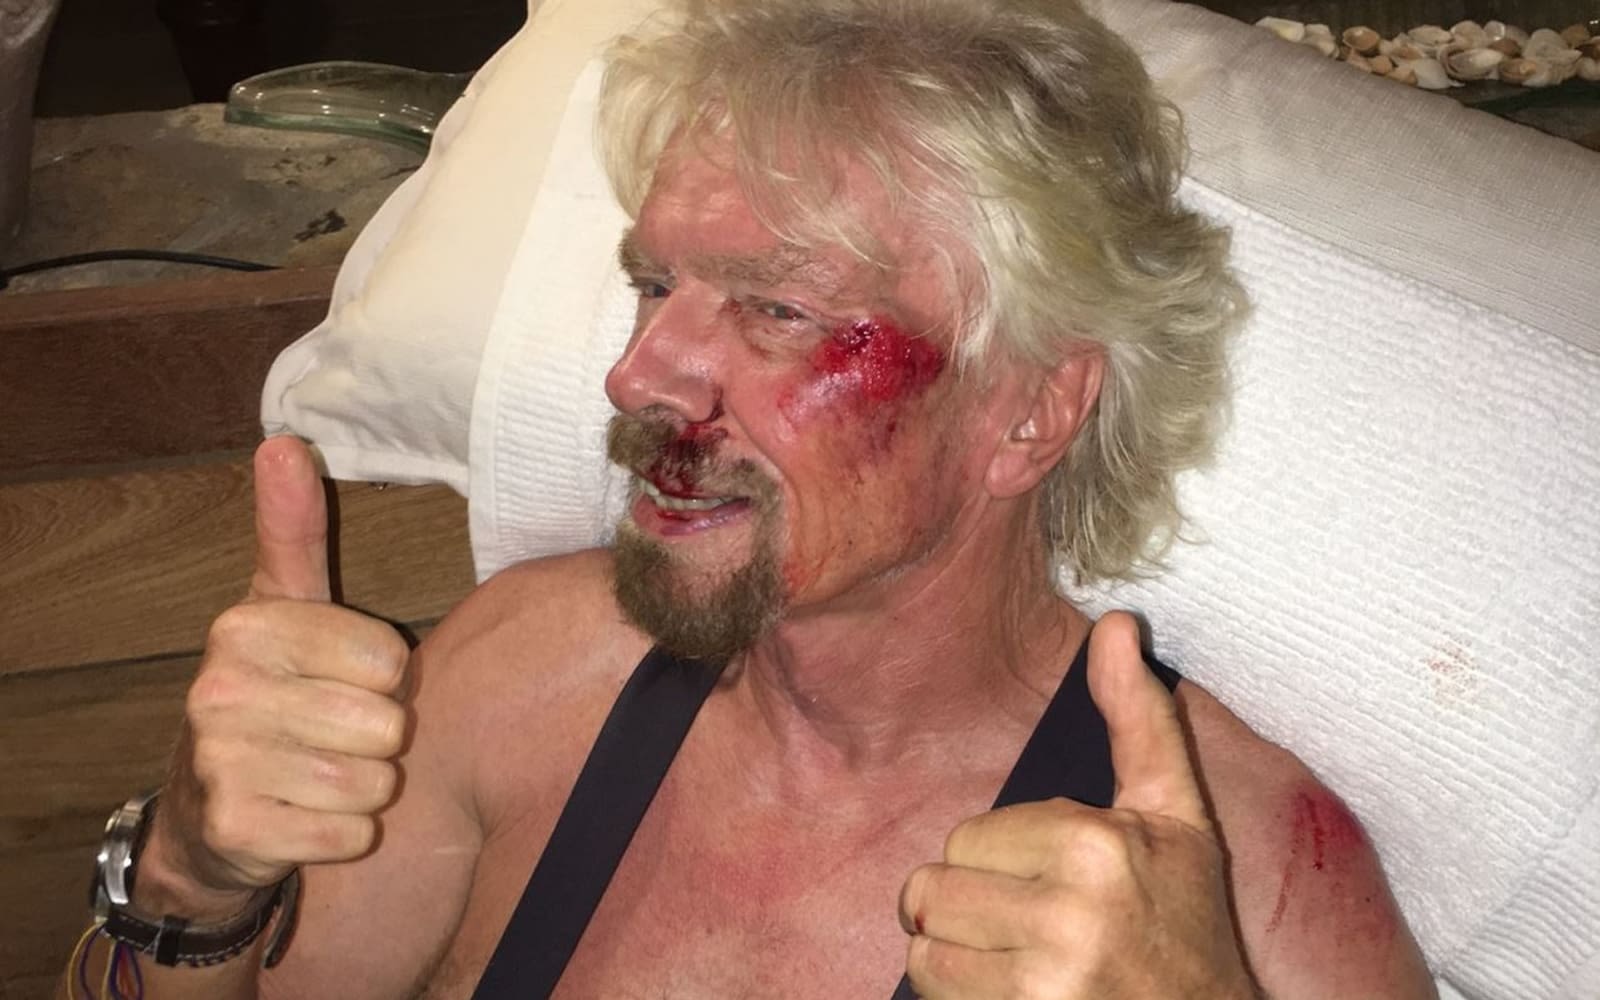 Richard Branson's injuries after his bike accident